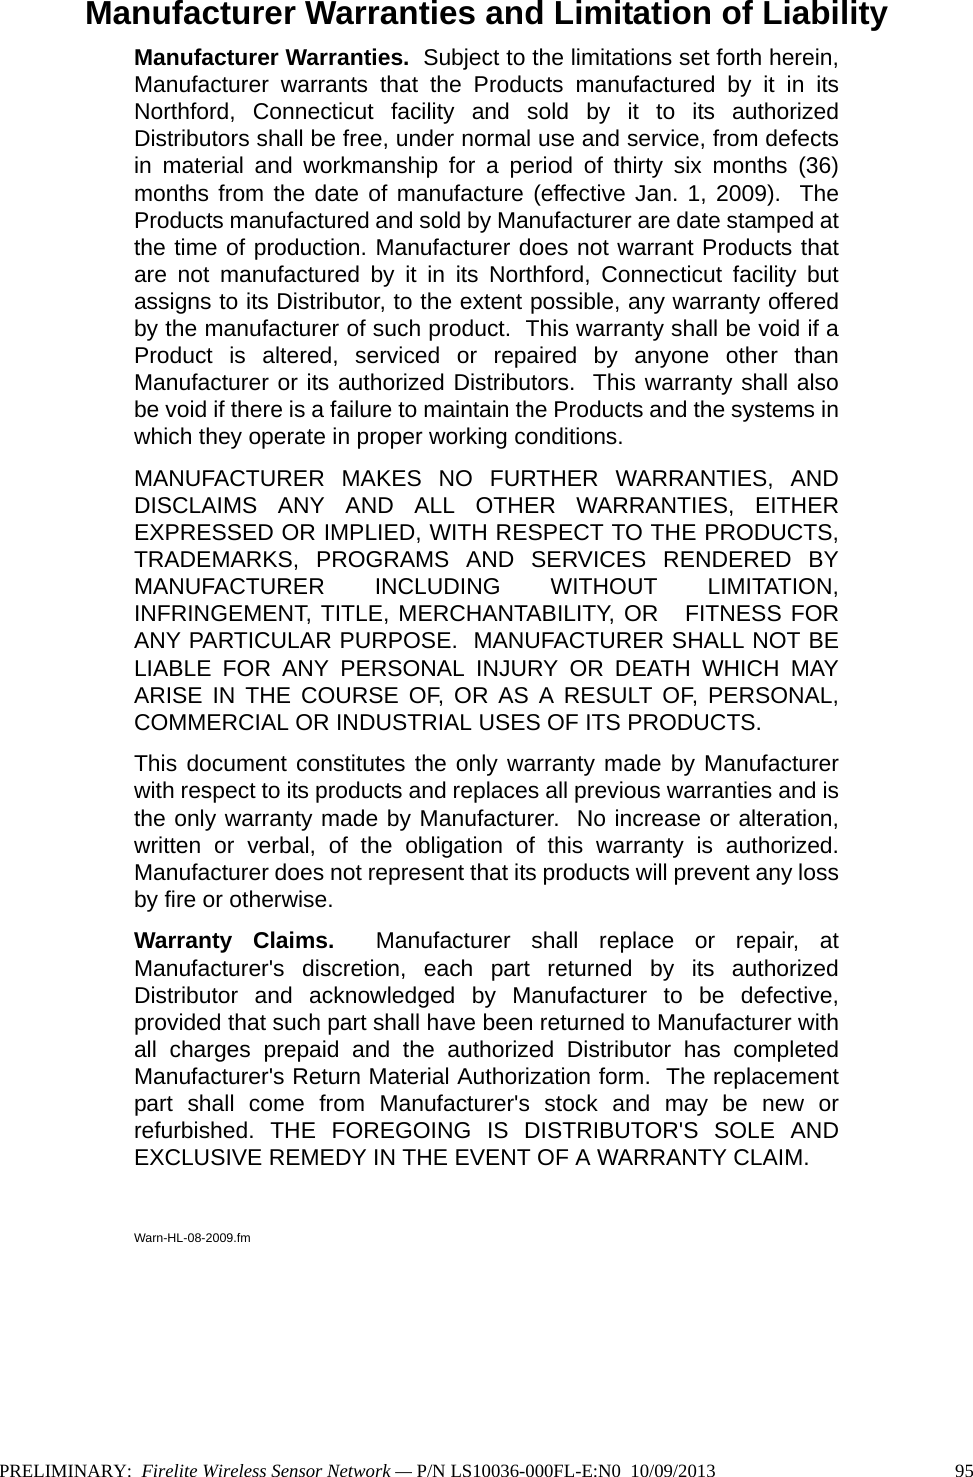 Manufacturer Warranties and Limitation of LiabilityManufacturer Warranties.  Subject to the limitations set forth herein,Manufacturer warrants that the Products manufactured by it in itsNorthford, Connecticut facility and sold by it to its authorizedDistributors shall be free, under normal use and service, from defectsin material and workmanship for a period of thirty six months (36)months from the date of manufacture (effective Jan. 1, 2009).  TheProducts manufactured and sold by Manufacturer are date stamped atthe time of production. Manufacturer does not warrant Products thatare not manufactured by it in its Northford, Connecticut facility butassigns to its Distributor, to the extent possible, any warranty offeredby the manufacturer of such product.  This warranty shall be void if aProduct is altered, serviced or repaired by anyone other thanManufacturer or its authorized Distributors.  This warranty shall alsobe void if there is a failure to maintain the Products and the systems inwhich they operate in proper working conditions.MANUFACTURER MAKES NO FURTHER WARRANTIES, ANDDISCLAIMS ANY AND ALL OTHER WARRANTIES, EITHEREXPRESSED OR IMPLIED, WITH RESPECT TO THE PRODUCTS,TRADEMARKS, PROGRAMS AND SERVICES RENDERED BYMANUFACTURER INCLUDING WITHOUT LIMITATION,INFRINGEMENT, TITLE, MERCHANTABILITY, OR   FITNESS FORANY PARTICULAR PURPOSE.  MANUFACTURER SHALL NOT BELIABLE FOR ANY PERSONAL INJURY OR DEATH WHICH MAYARISE IN THE COURSE OF, OR AS A RESULT OF, PERSONAL,COMMERCIAL OR INDUSTRIAL USES OF ITS PRODUCTS.This document constitutes the only warranty made by Manufacturerwith respect to its products and replaces all previous warranties and isthe only warranty made by Manufacturer.  No increase or alteration,written or verbal, of the obligation of this warranty is authorized.Manufacturer does not represent that its products will prevent any lossby fire or otherwise.Warranty Claims.  Manufacturer shall replace or repair, atManufacturer&apos;s discretion, each part returned by its authorizedDistributor and acknowledged by Manufacturer to be defective,provided that such part shall have been returned to Manufacturer withall charges prepaid and the authorized Distributor has completedManufacturer&apos;s Return Material Authorization form.  The replacementpart shall come from Manufacturer&apos;s stock and may be new orrefurbished. THE FOREGOING IS DISTRIBUTOR&apos;S SOLE ANDEXCLUSIVE REMEDY IN THE EVENT OF A WARRANTY CLAIM.  Warn-HL-08-2009.fmPRELIMINARY:  Firelite Wireless Sensor Network — P/N LS10036-000FL-E:N0  10/09/2013 95